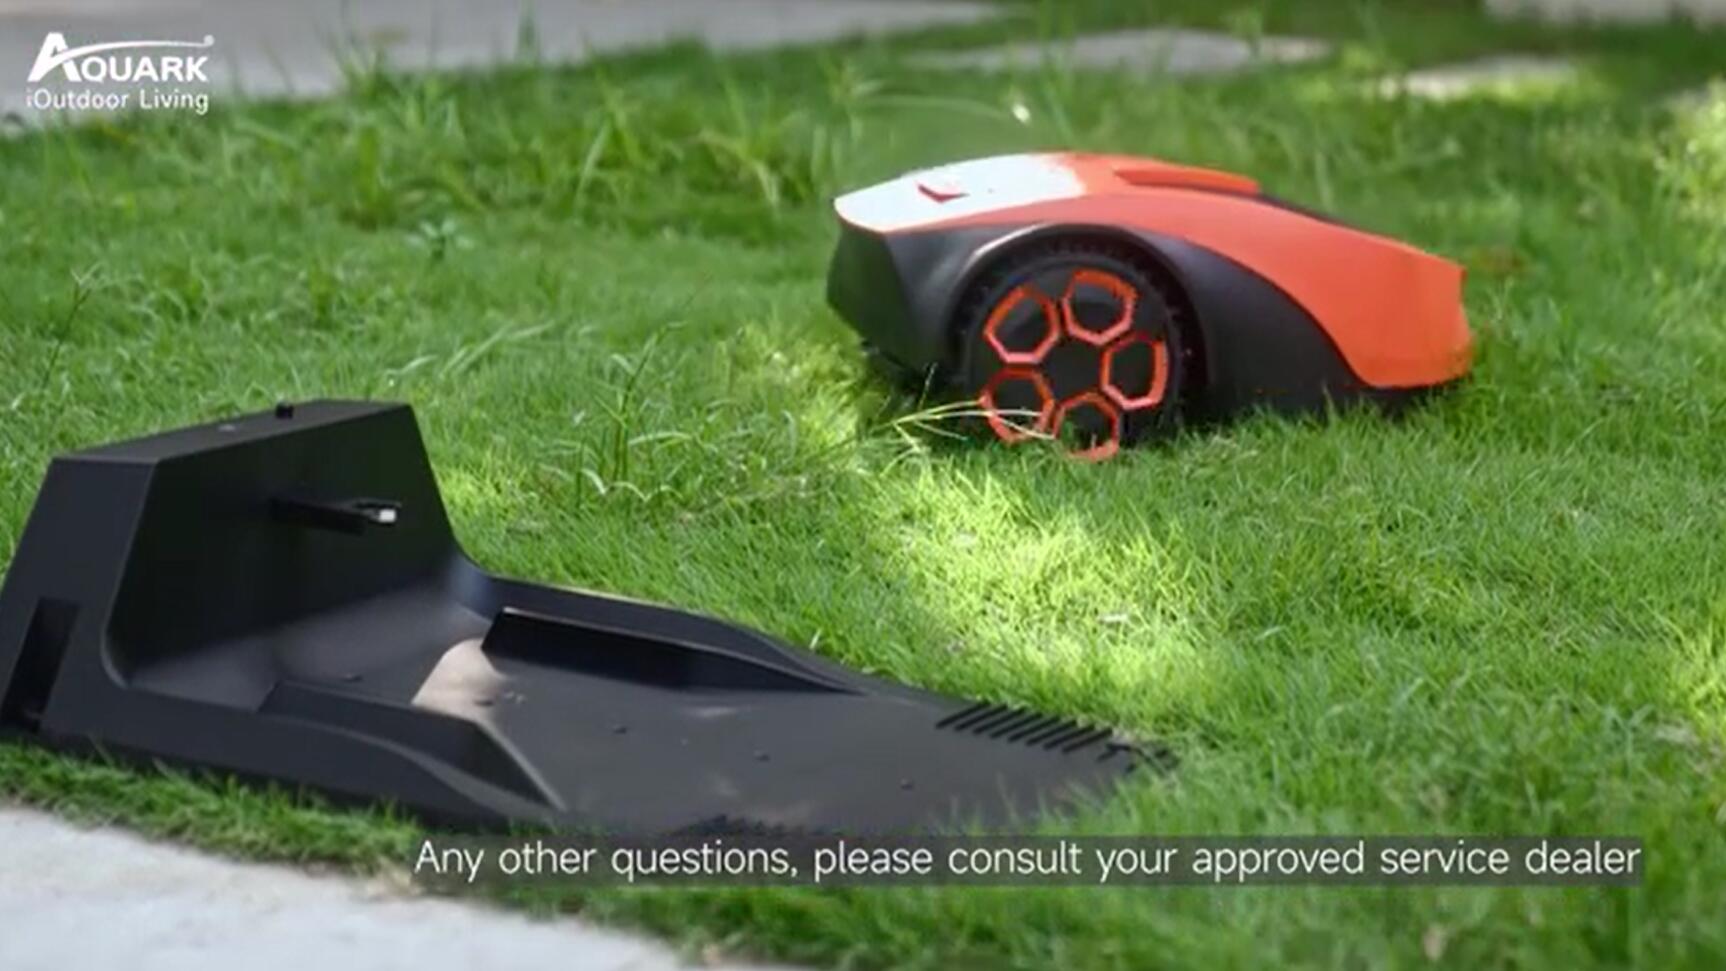 HOW TO INSTALL A ROBOTIC MOWER